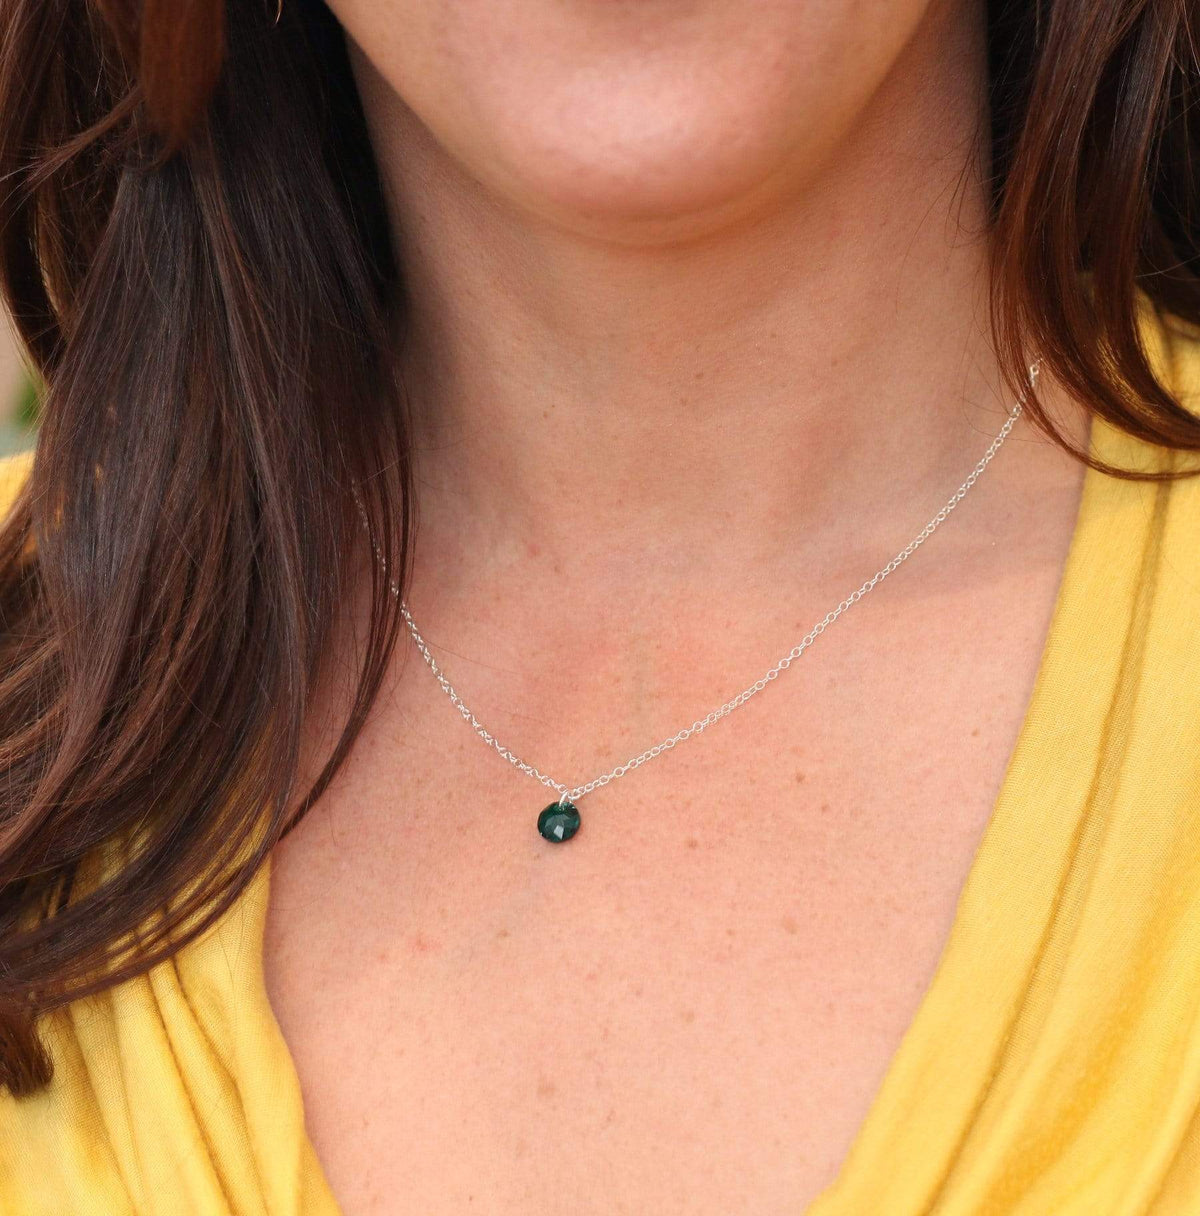 Close up view of a MaeMae Birthstone Necklace -Crystal Pendant on a delicate silver necklace chain.